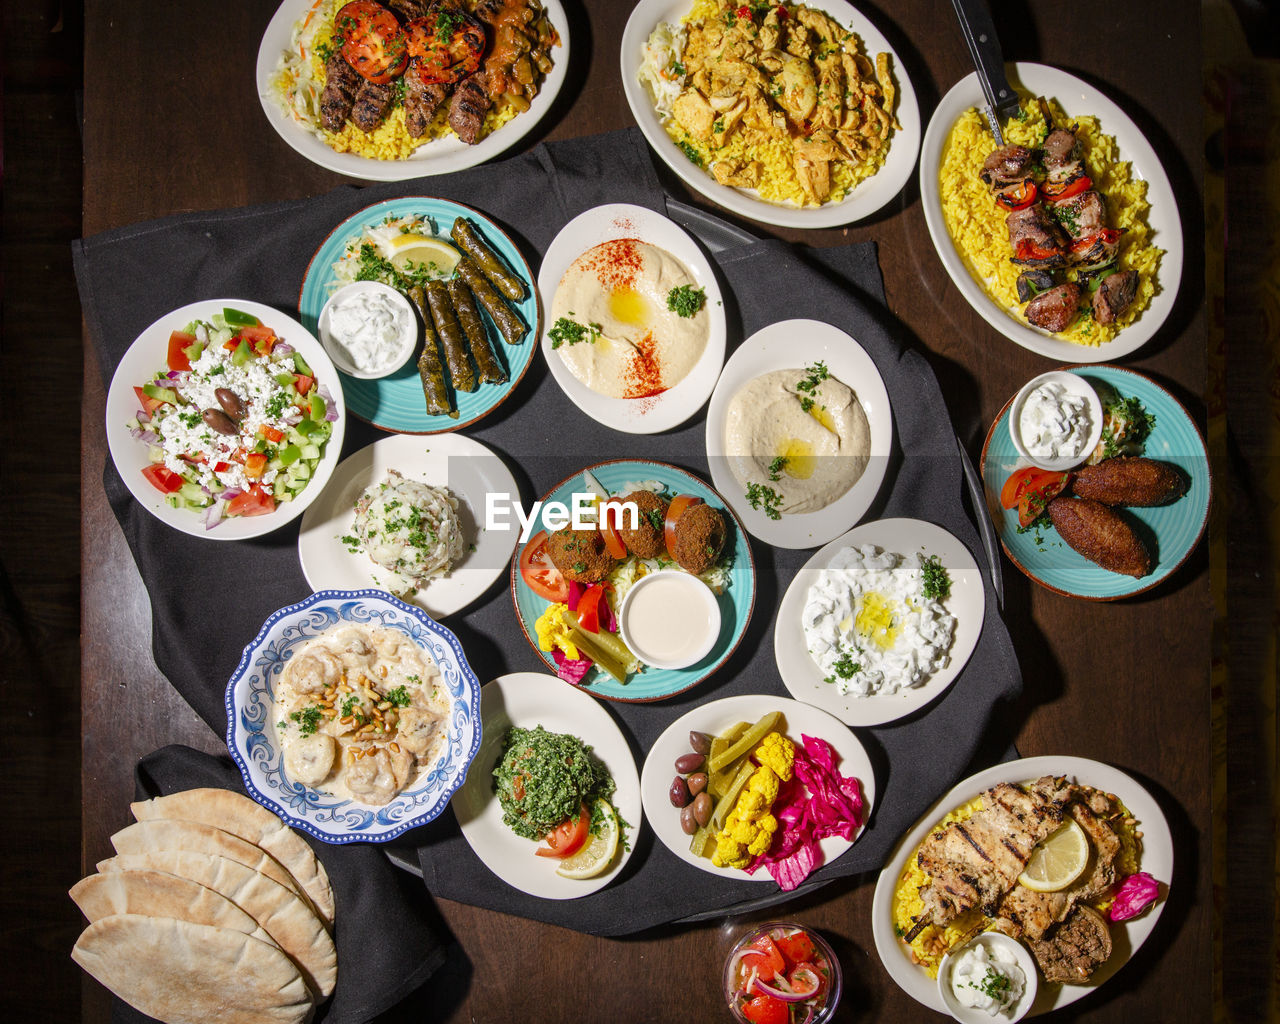 Above-view of a meditterranean feast spread out on a table